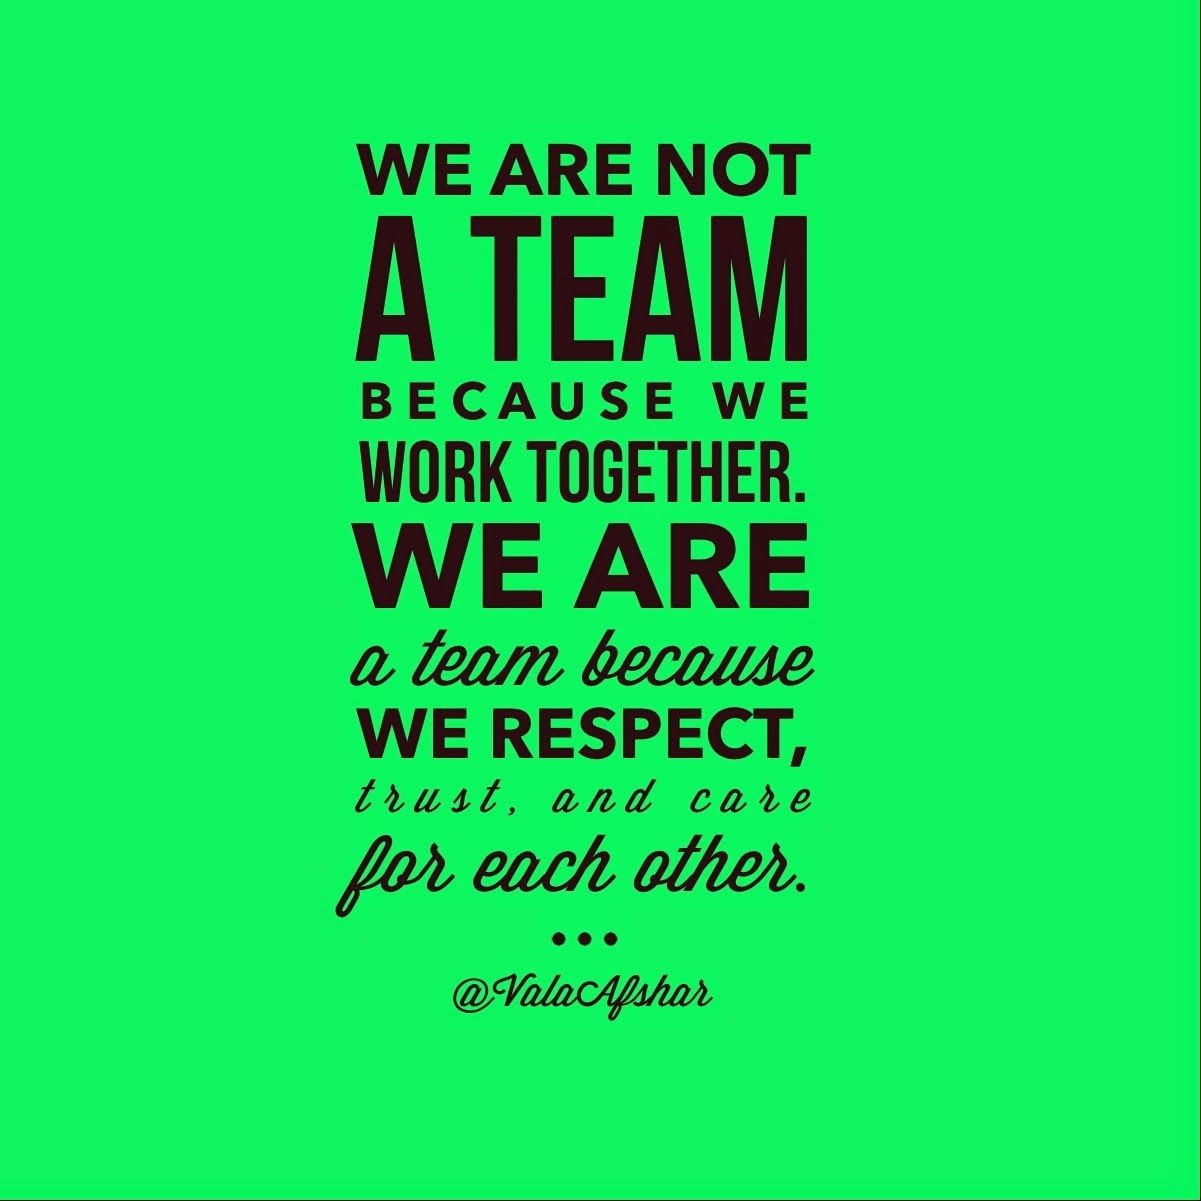 Relationship Team Quotes
 Love this quote about team building